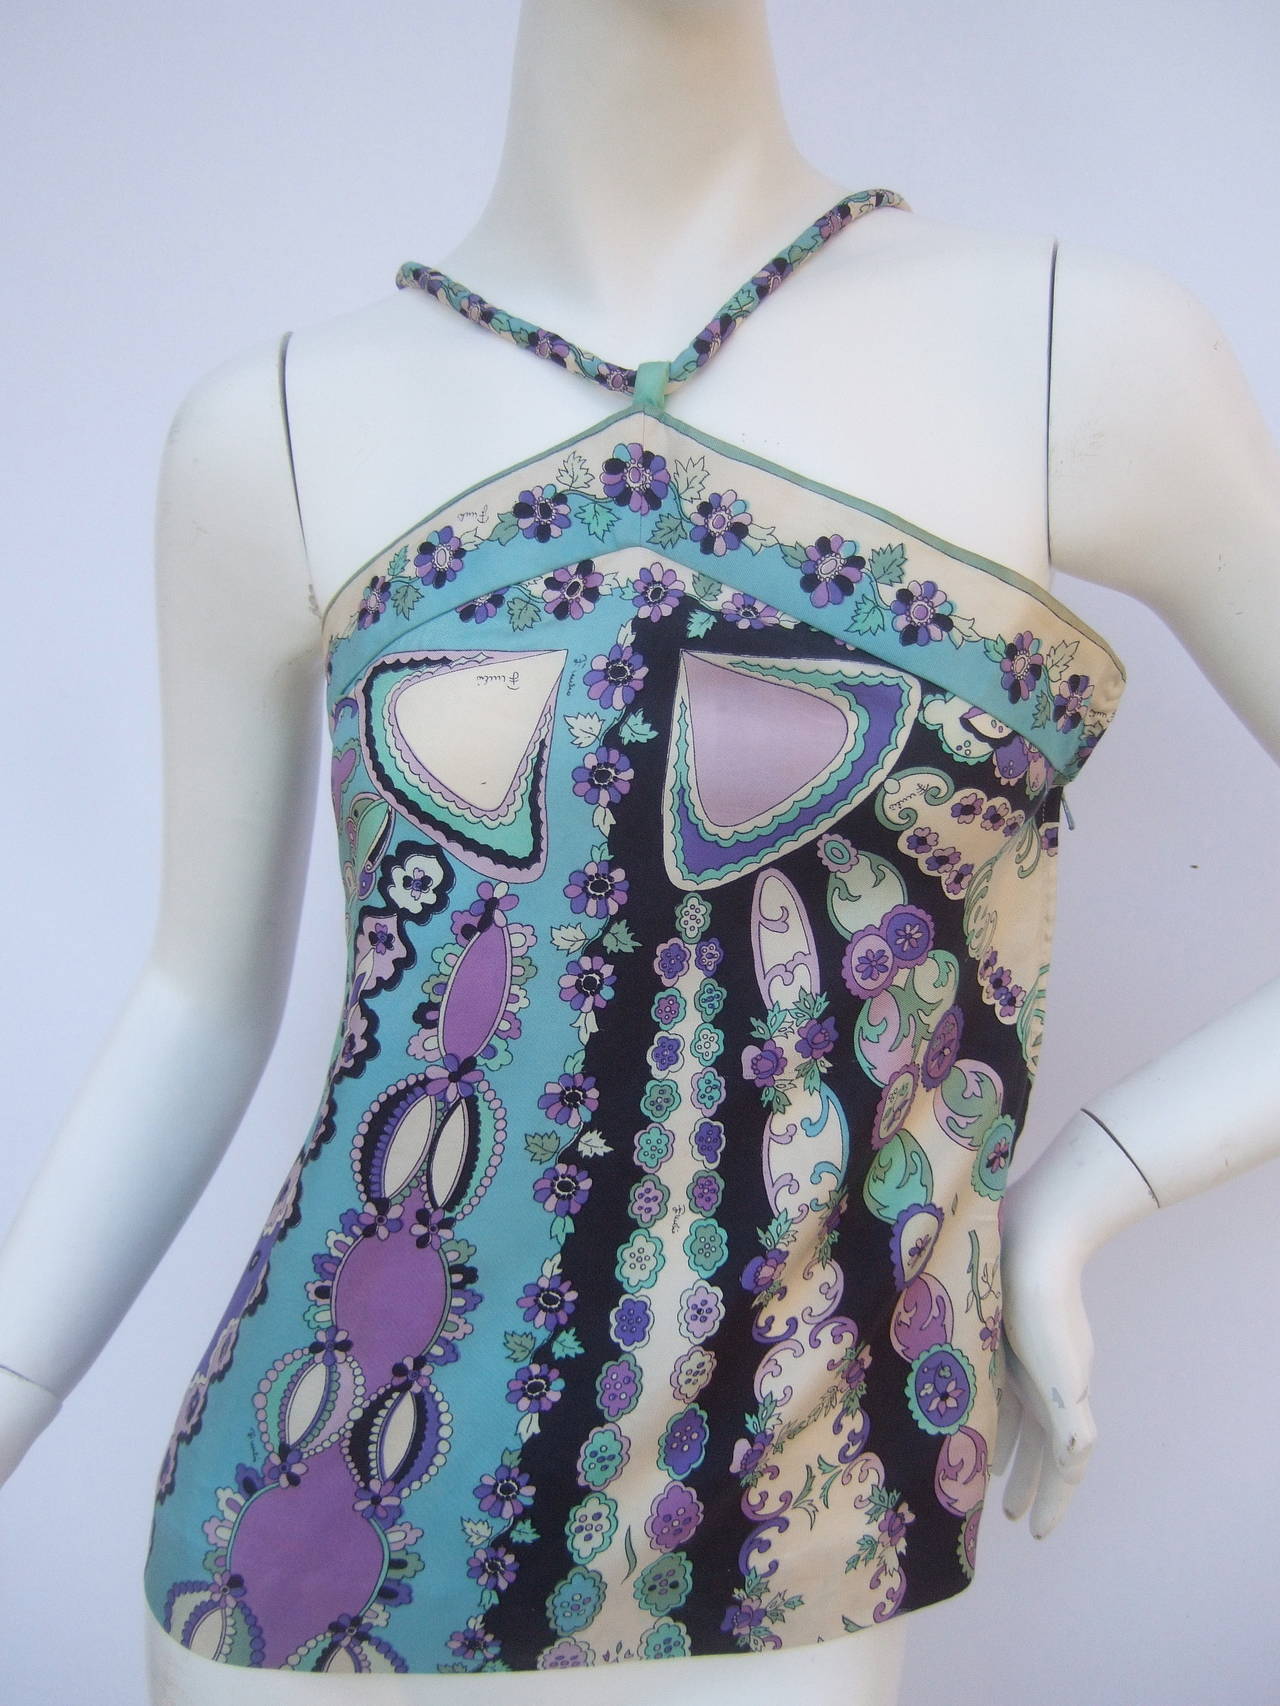 Emilio Pucci Pastel silk camisole top for Saks Fifth Avenue c 1970
The vintage Italian silk top is designed with a collage of vibrant
pastel colors; lavender, violet, aqua, turquoise with black & white

Within the pastel hues are a profusion of